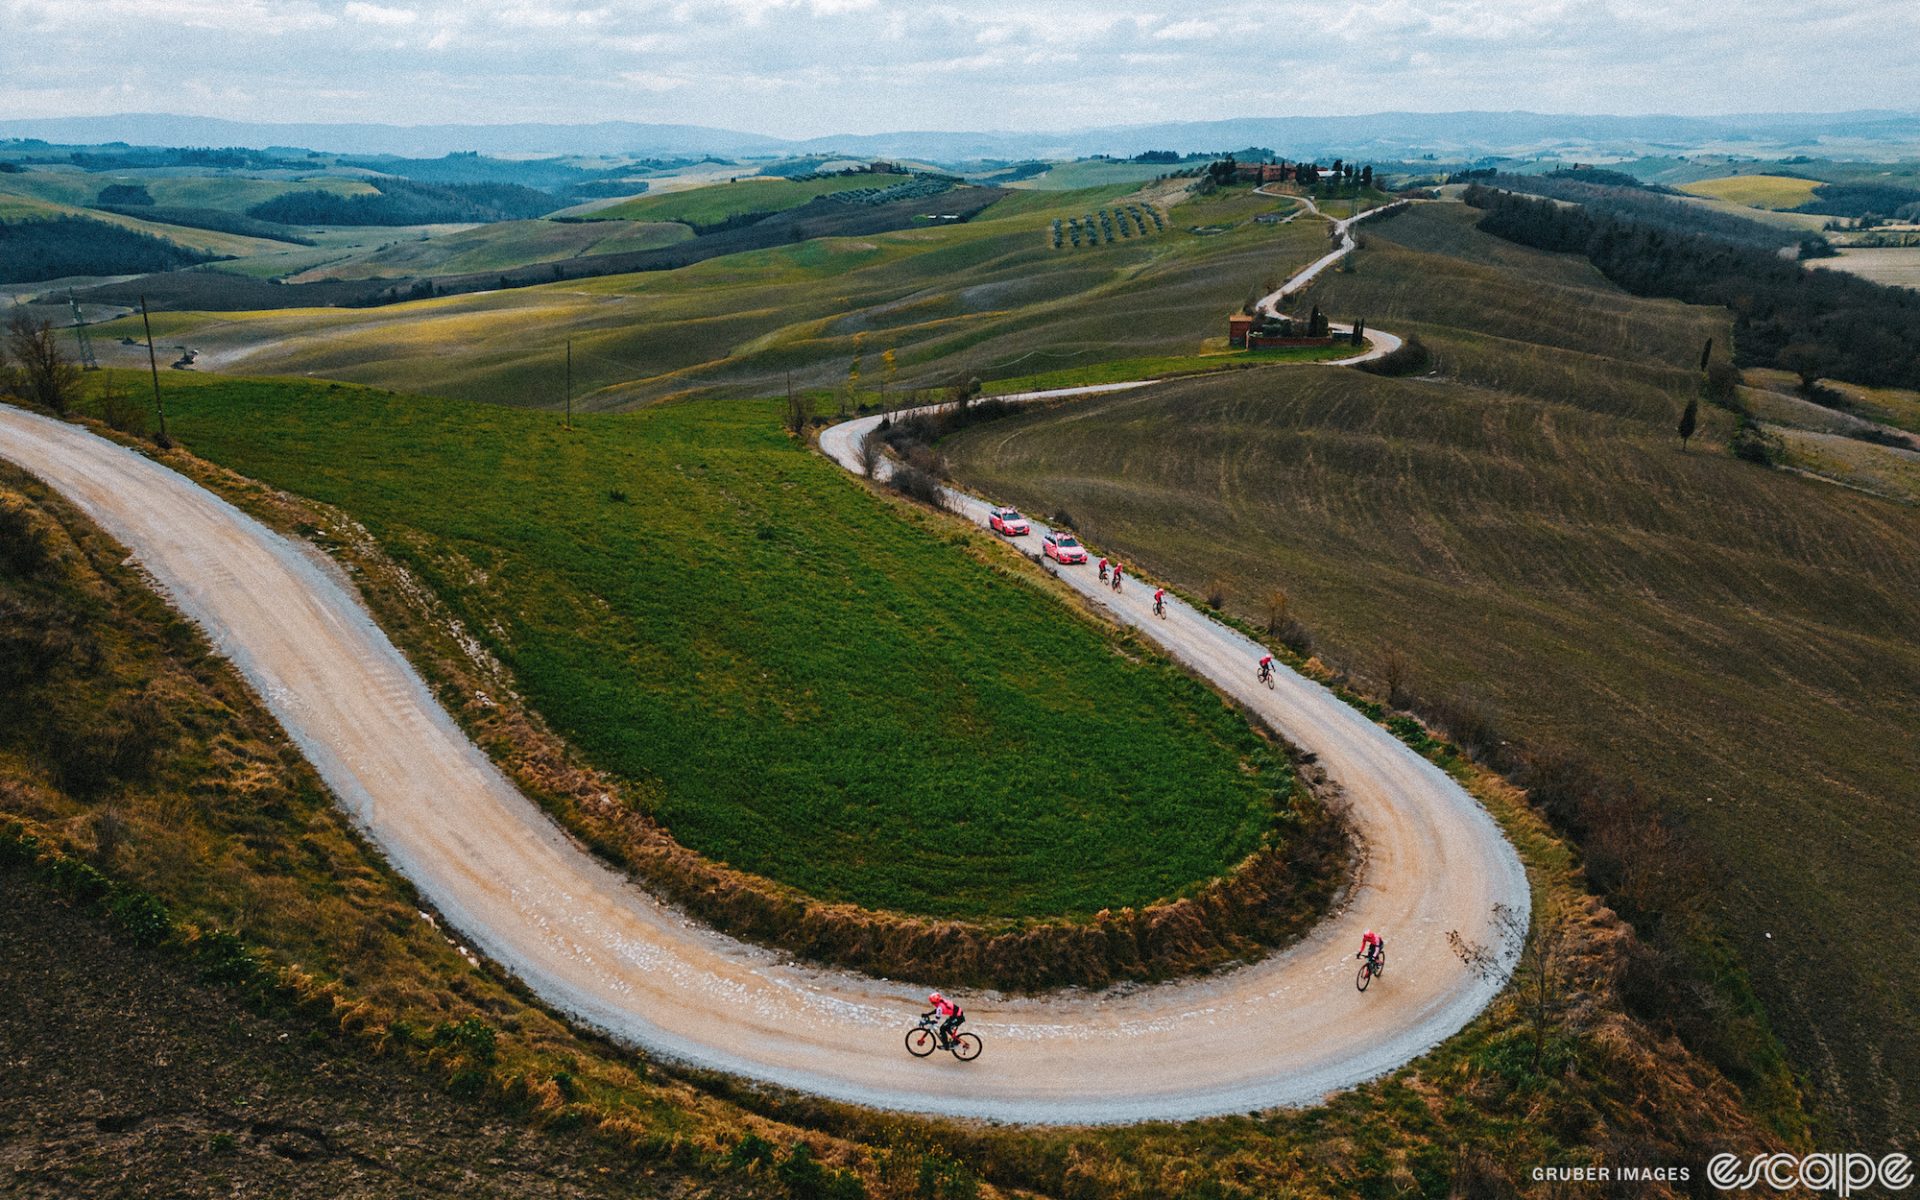 EF Education-Tibco-SVB riders recon Strade Bianche in March. They're on white gravel roads shown from above as the route snakes away amid vineyards and fields.